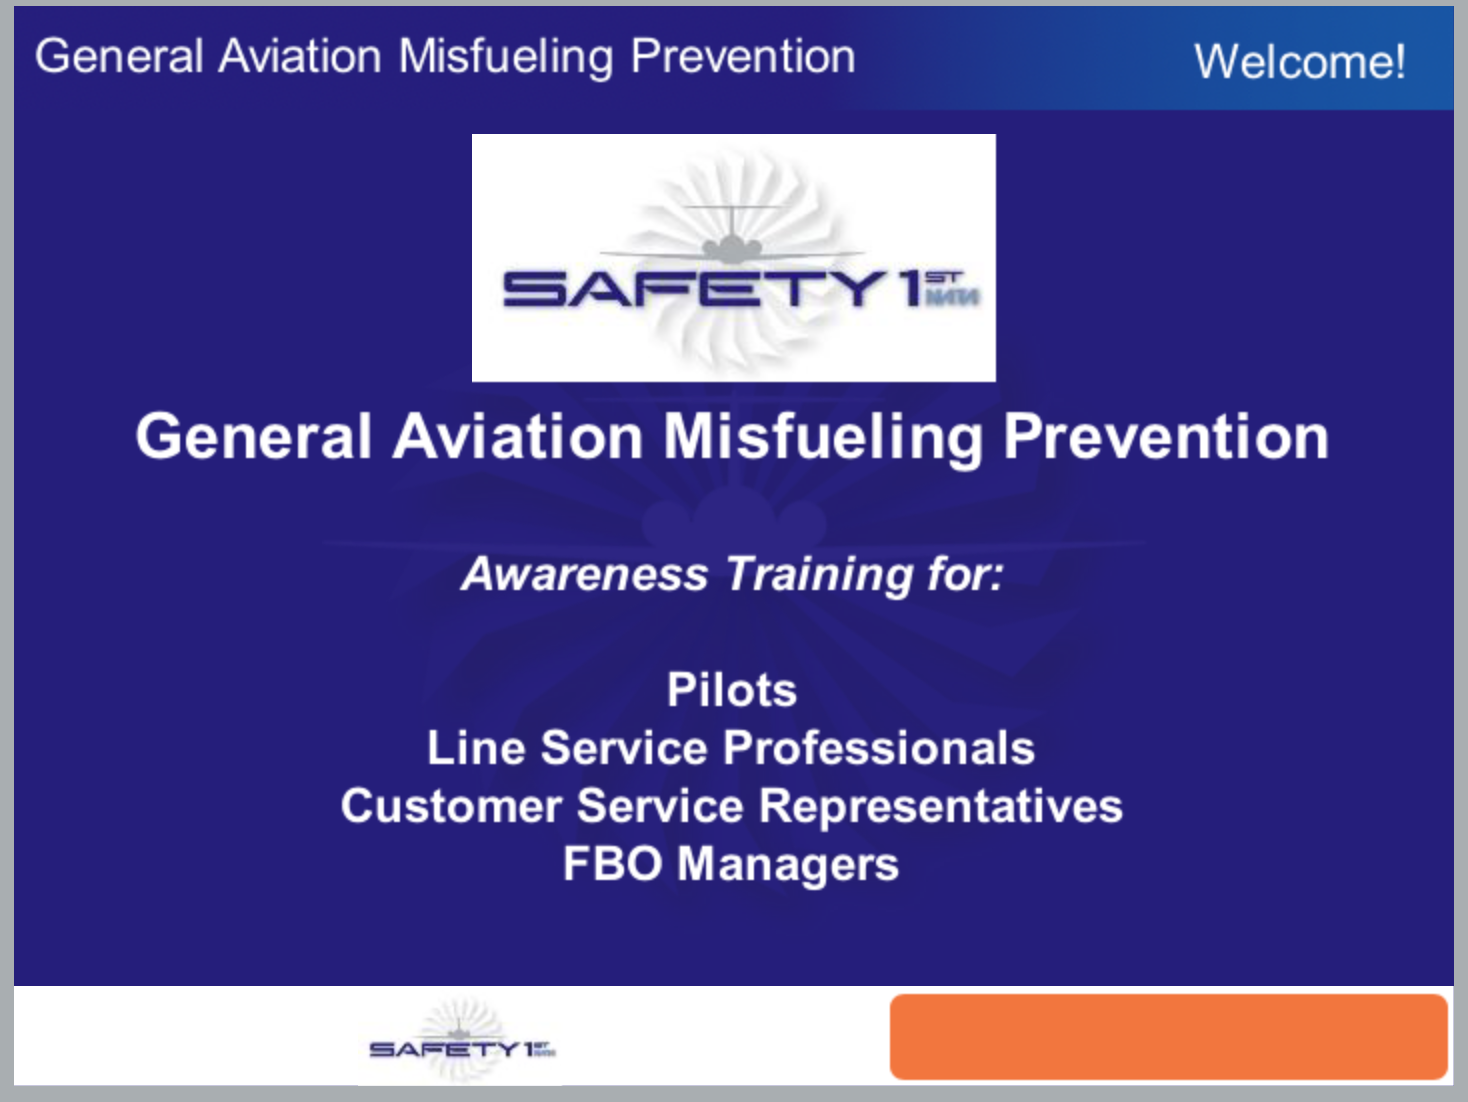 General Aviation Misfueling Awareness Training by Safety 1st